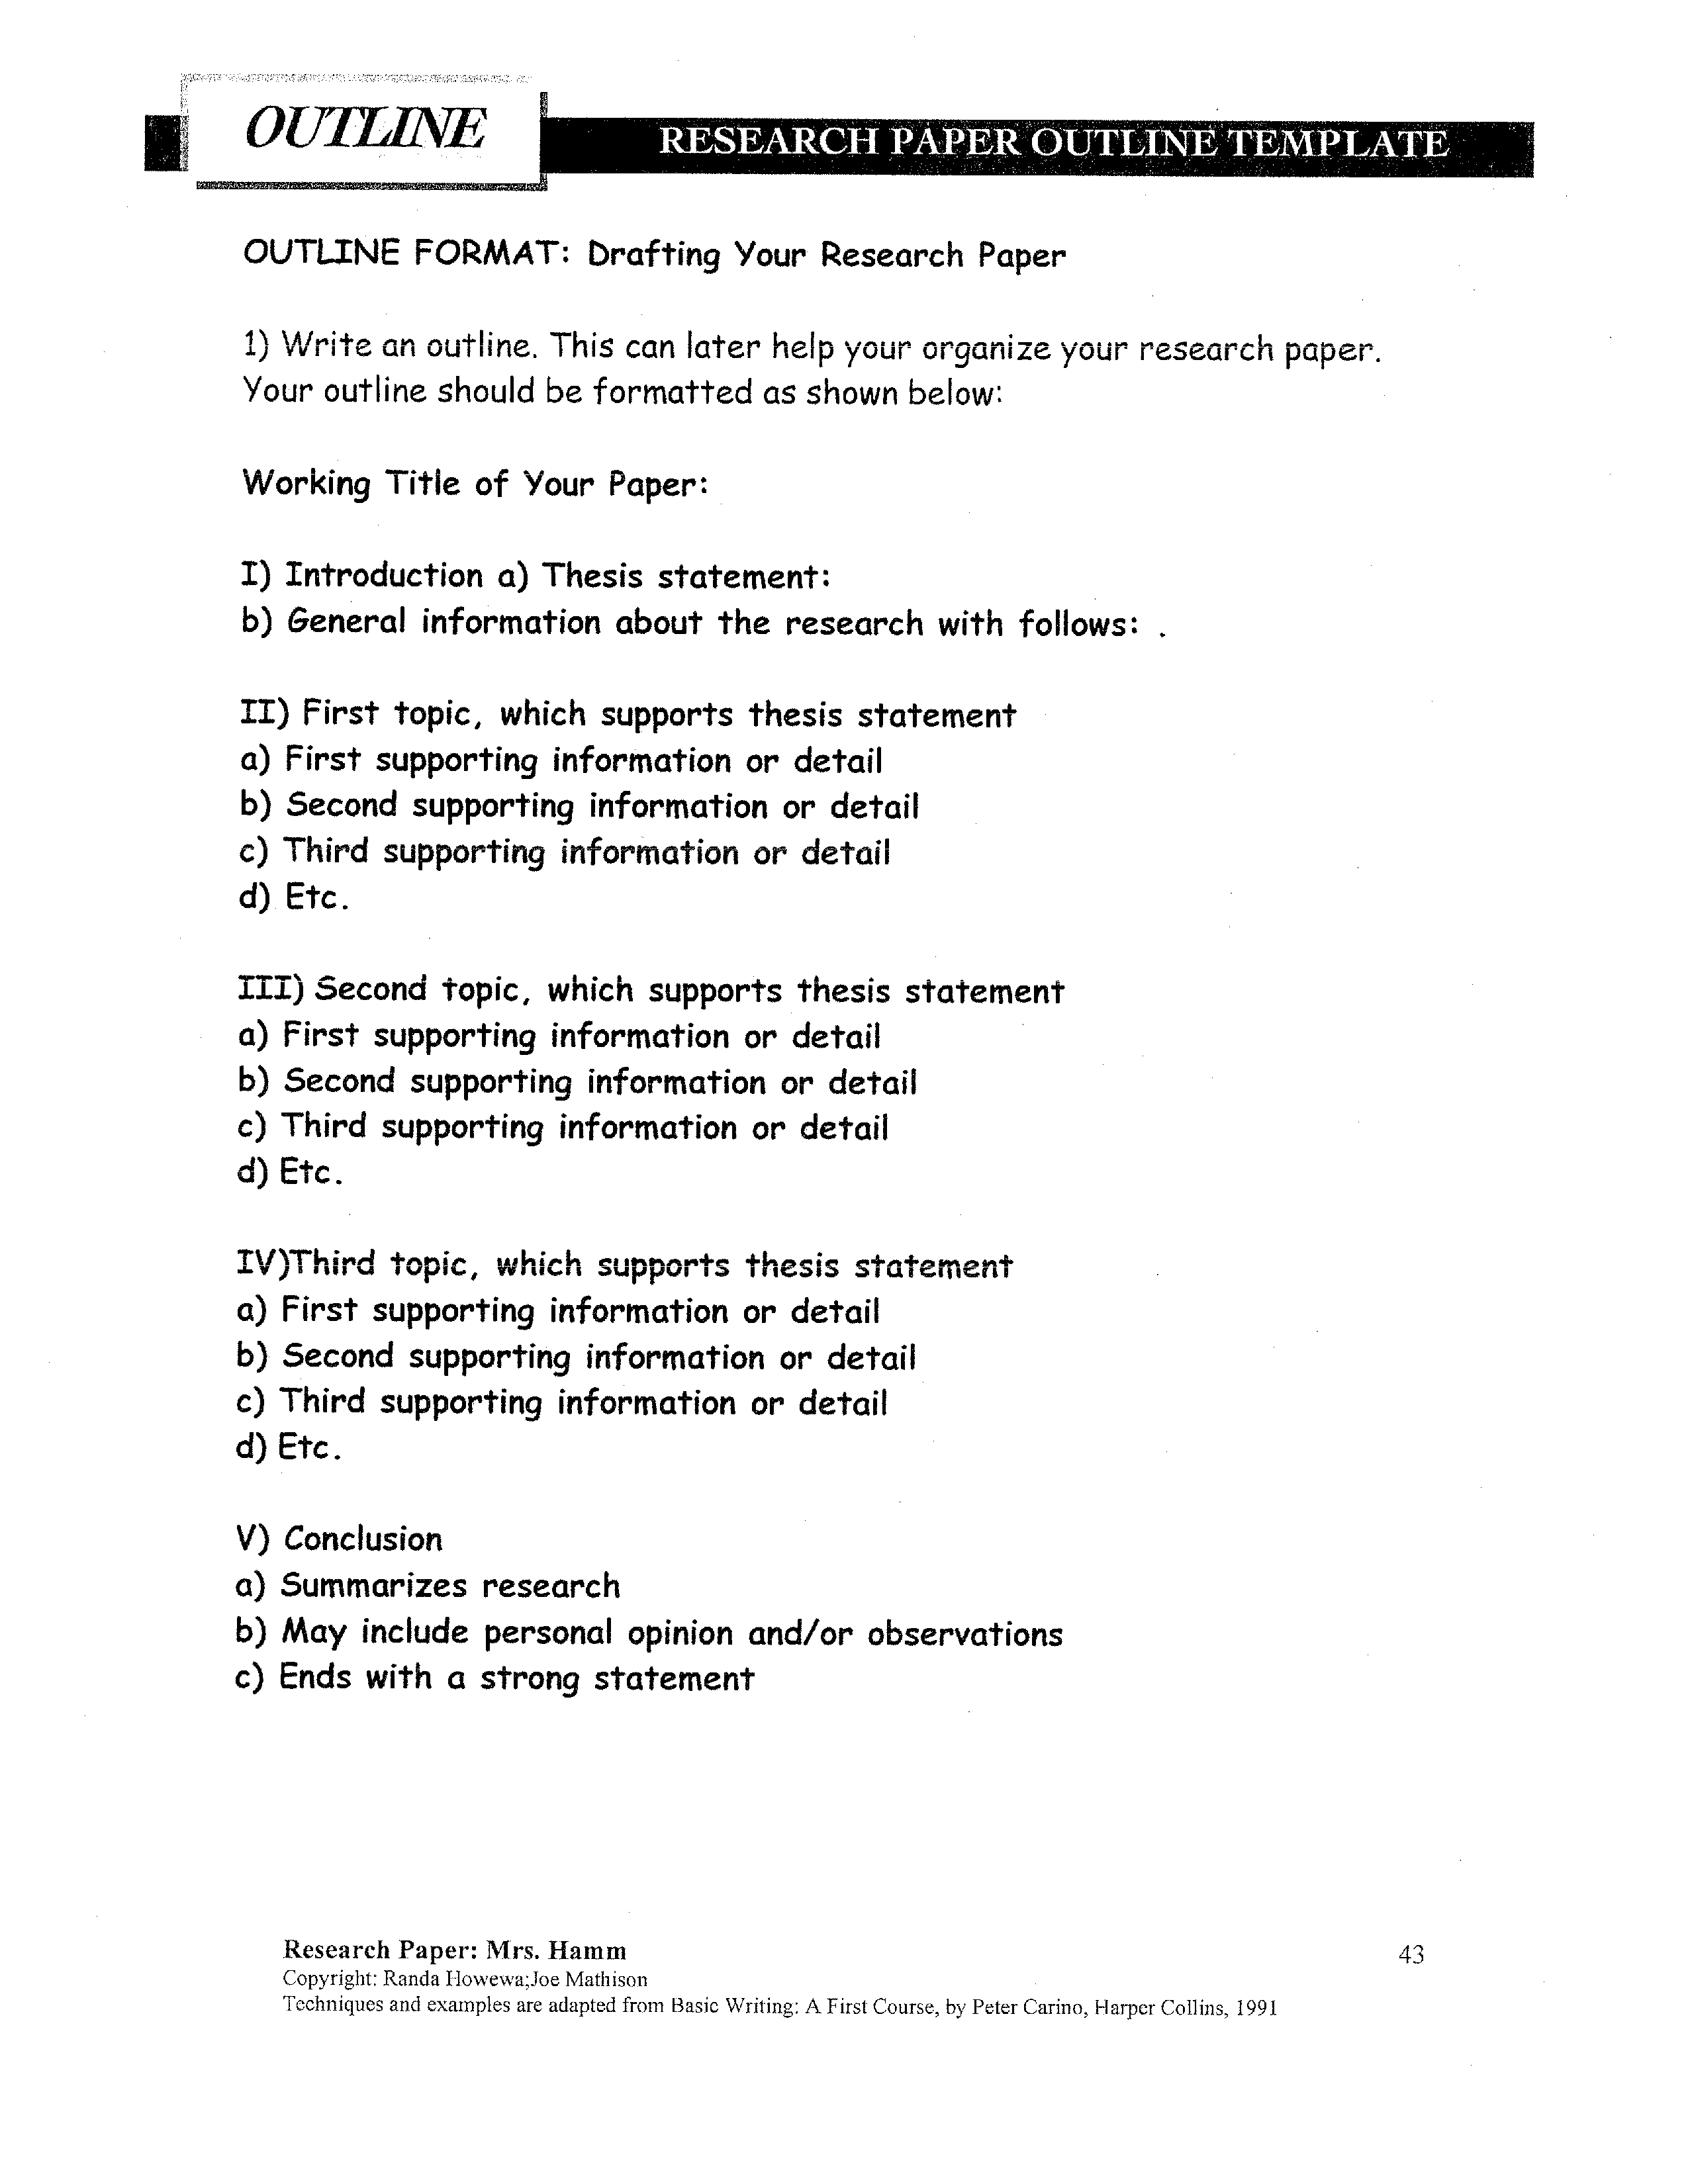 Research Paper Outline Format Blank Sample main image